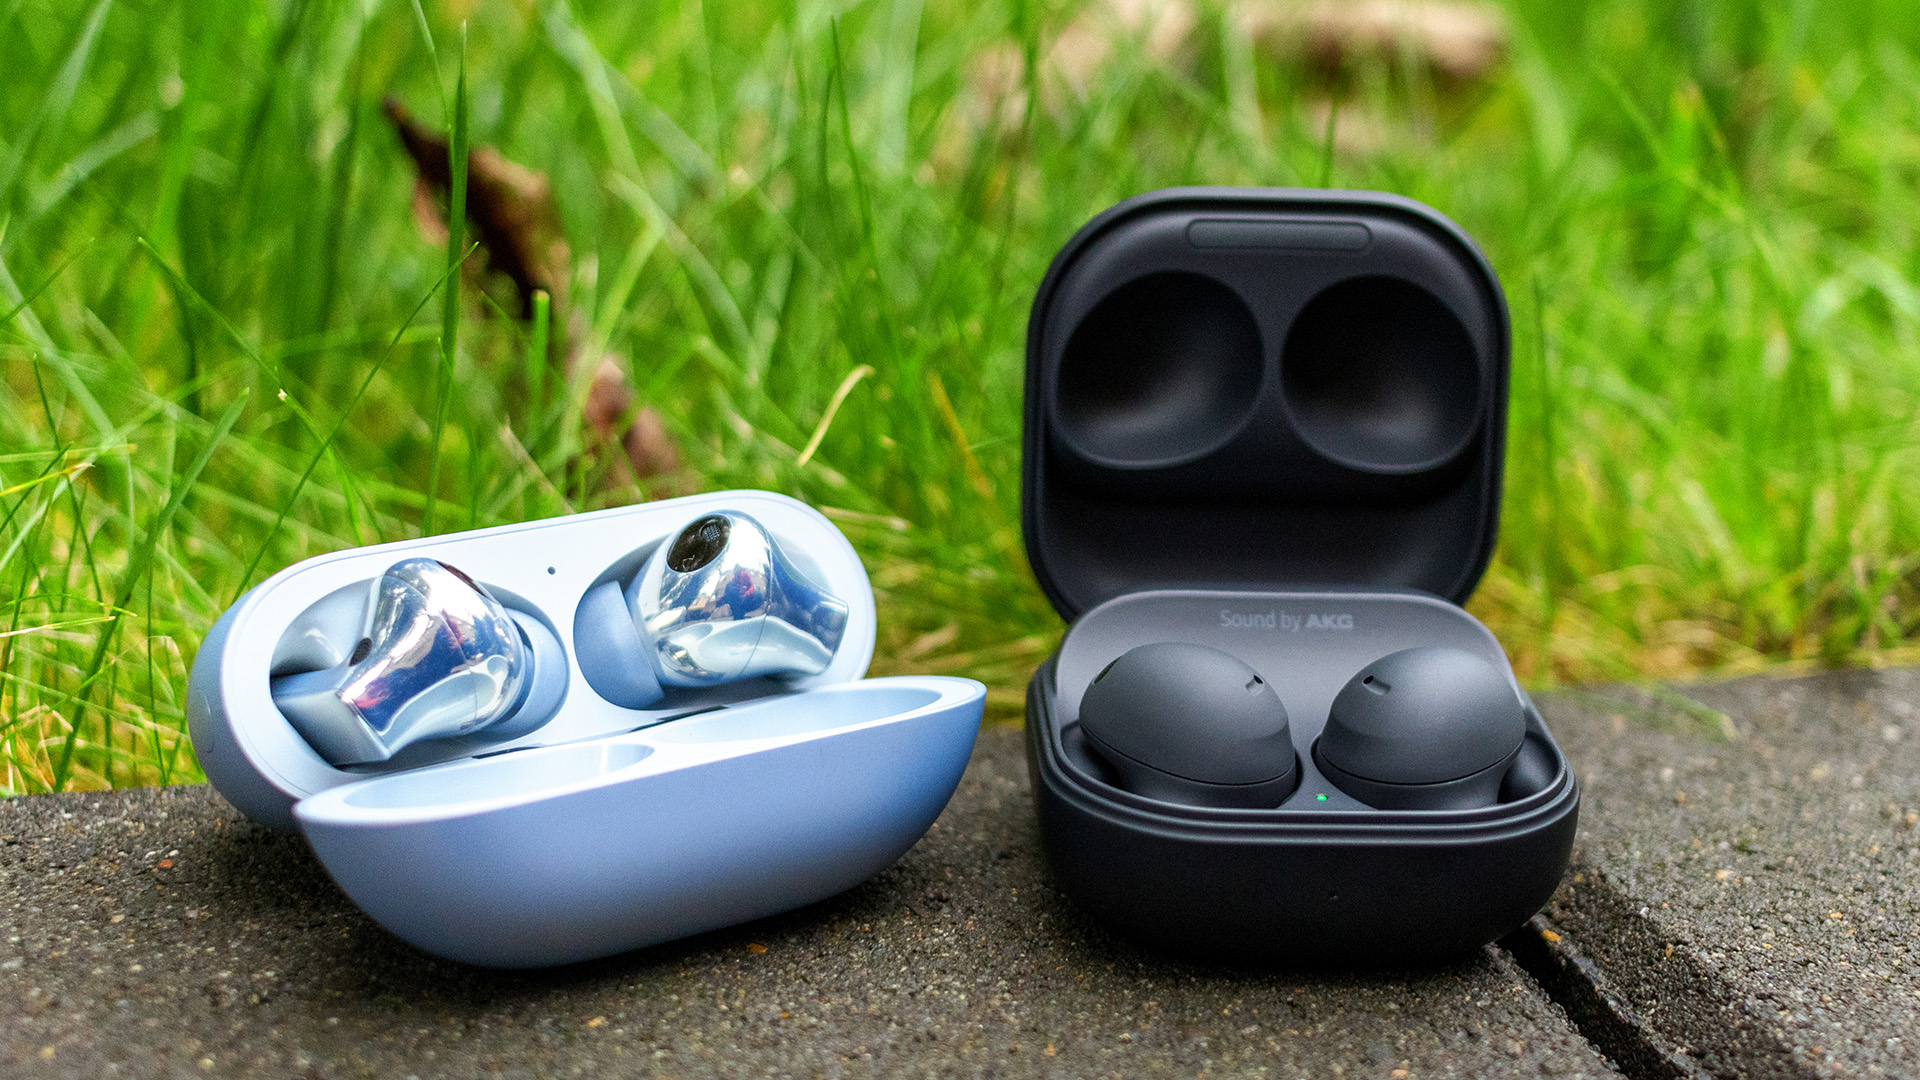 Apple Airpods Pro vs Samsung Galaxy Buds Pro: Which Pro is best